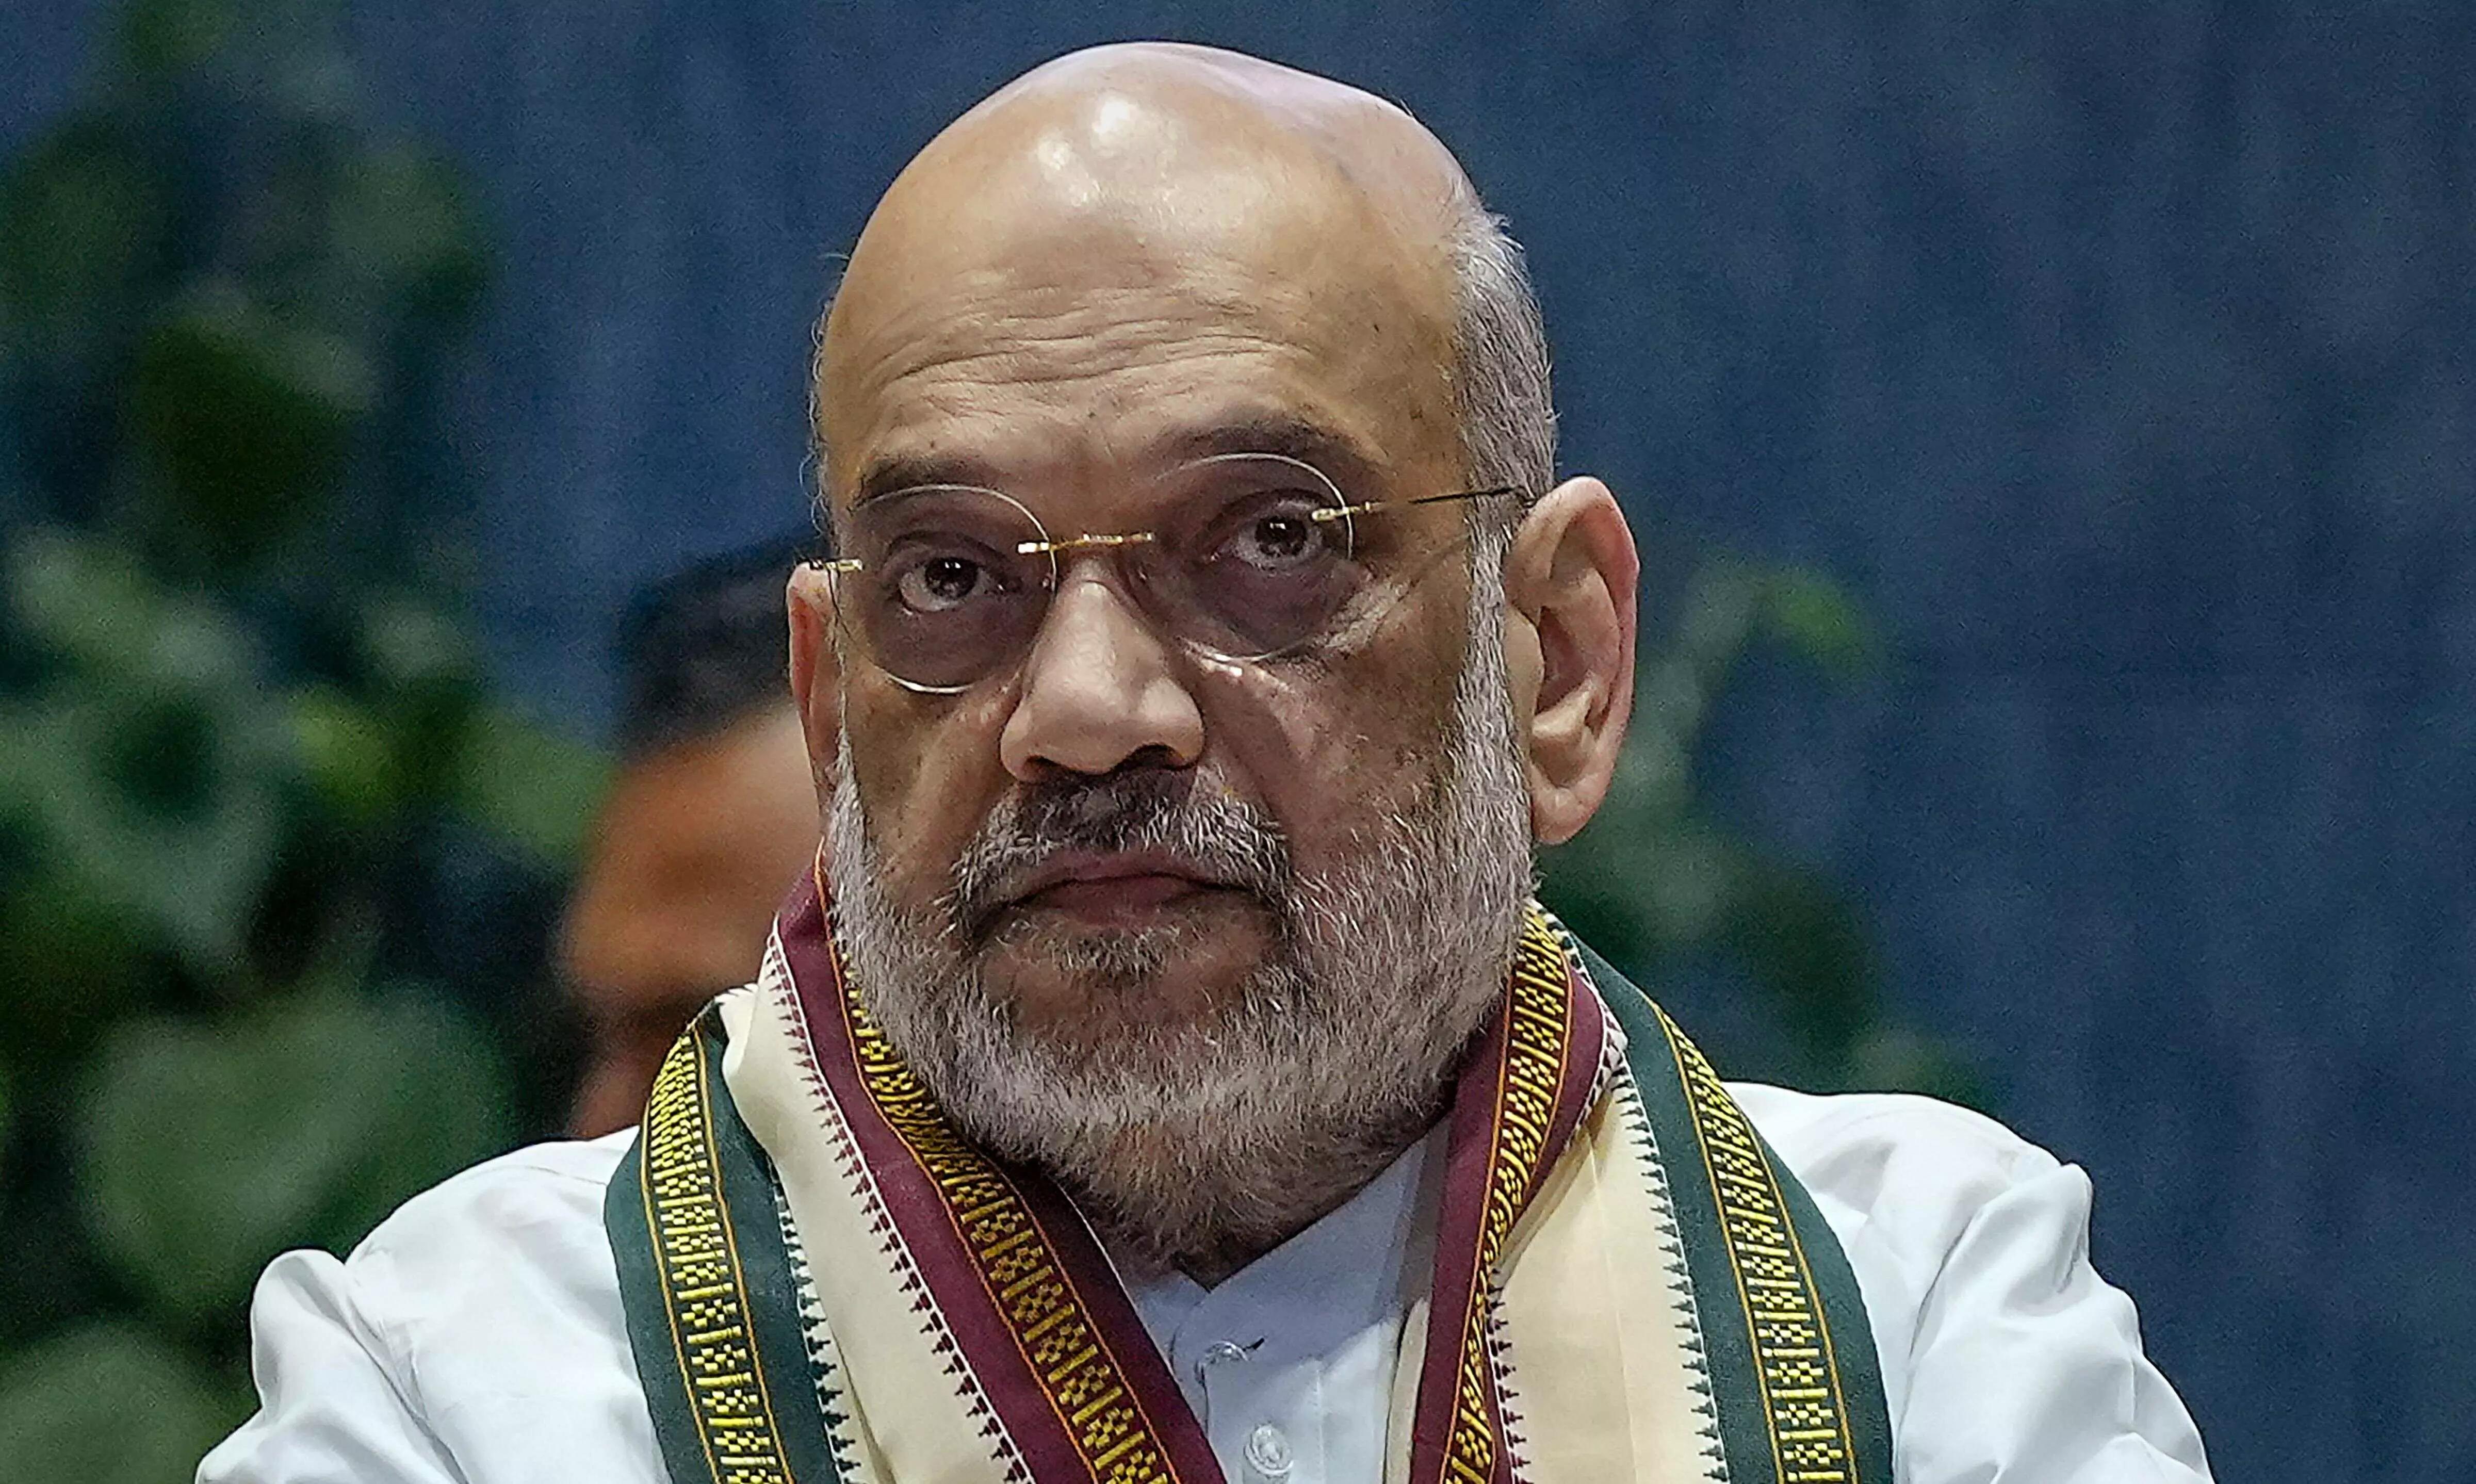 Implementation of Uniform Civil Code in country is PM Modis guarantee: Shah